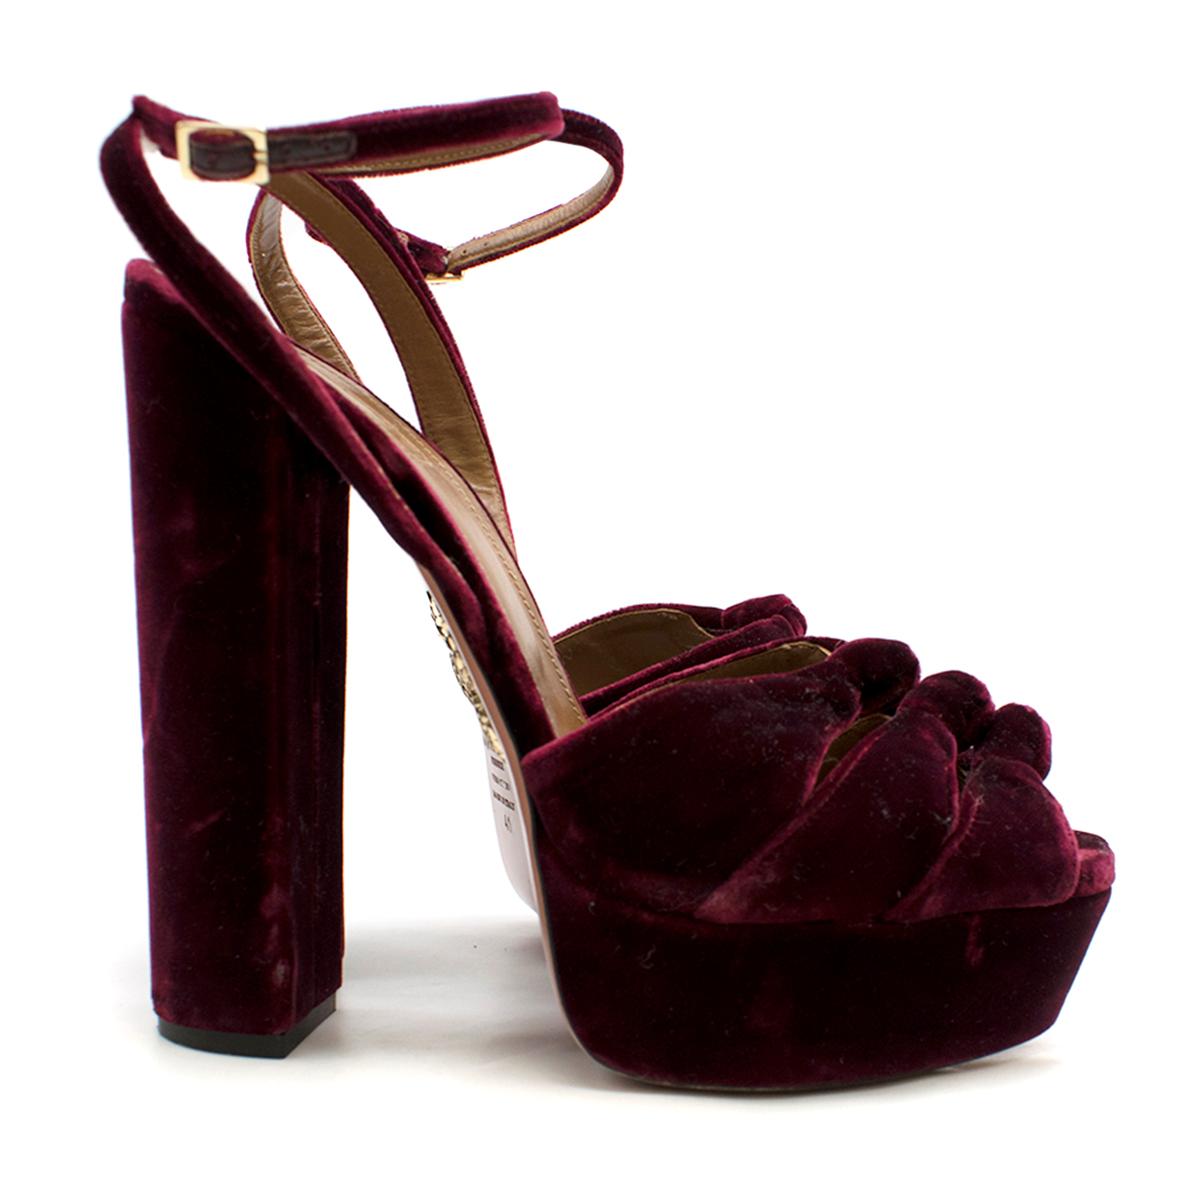 Mira Velvet Ankle-Strap Platform Sandals

- Ruby Red Heeled Sandals 
- Velvet block heels 
- Platformed
- Ankle strapped
- Knot accent at front
- Leather sole 

Please note, these items are pre-owned and may show some signs of storage, even when